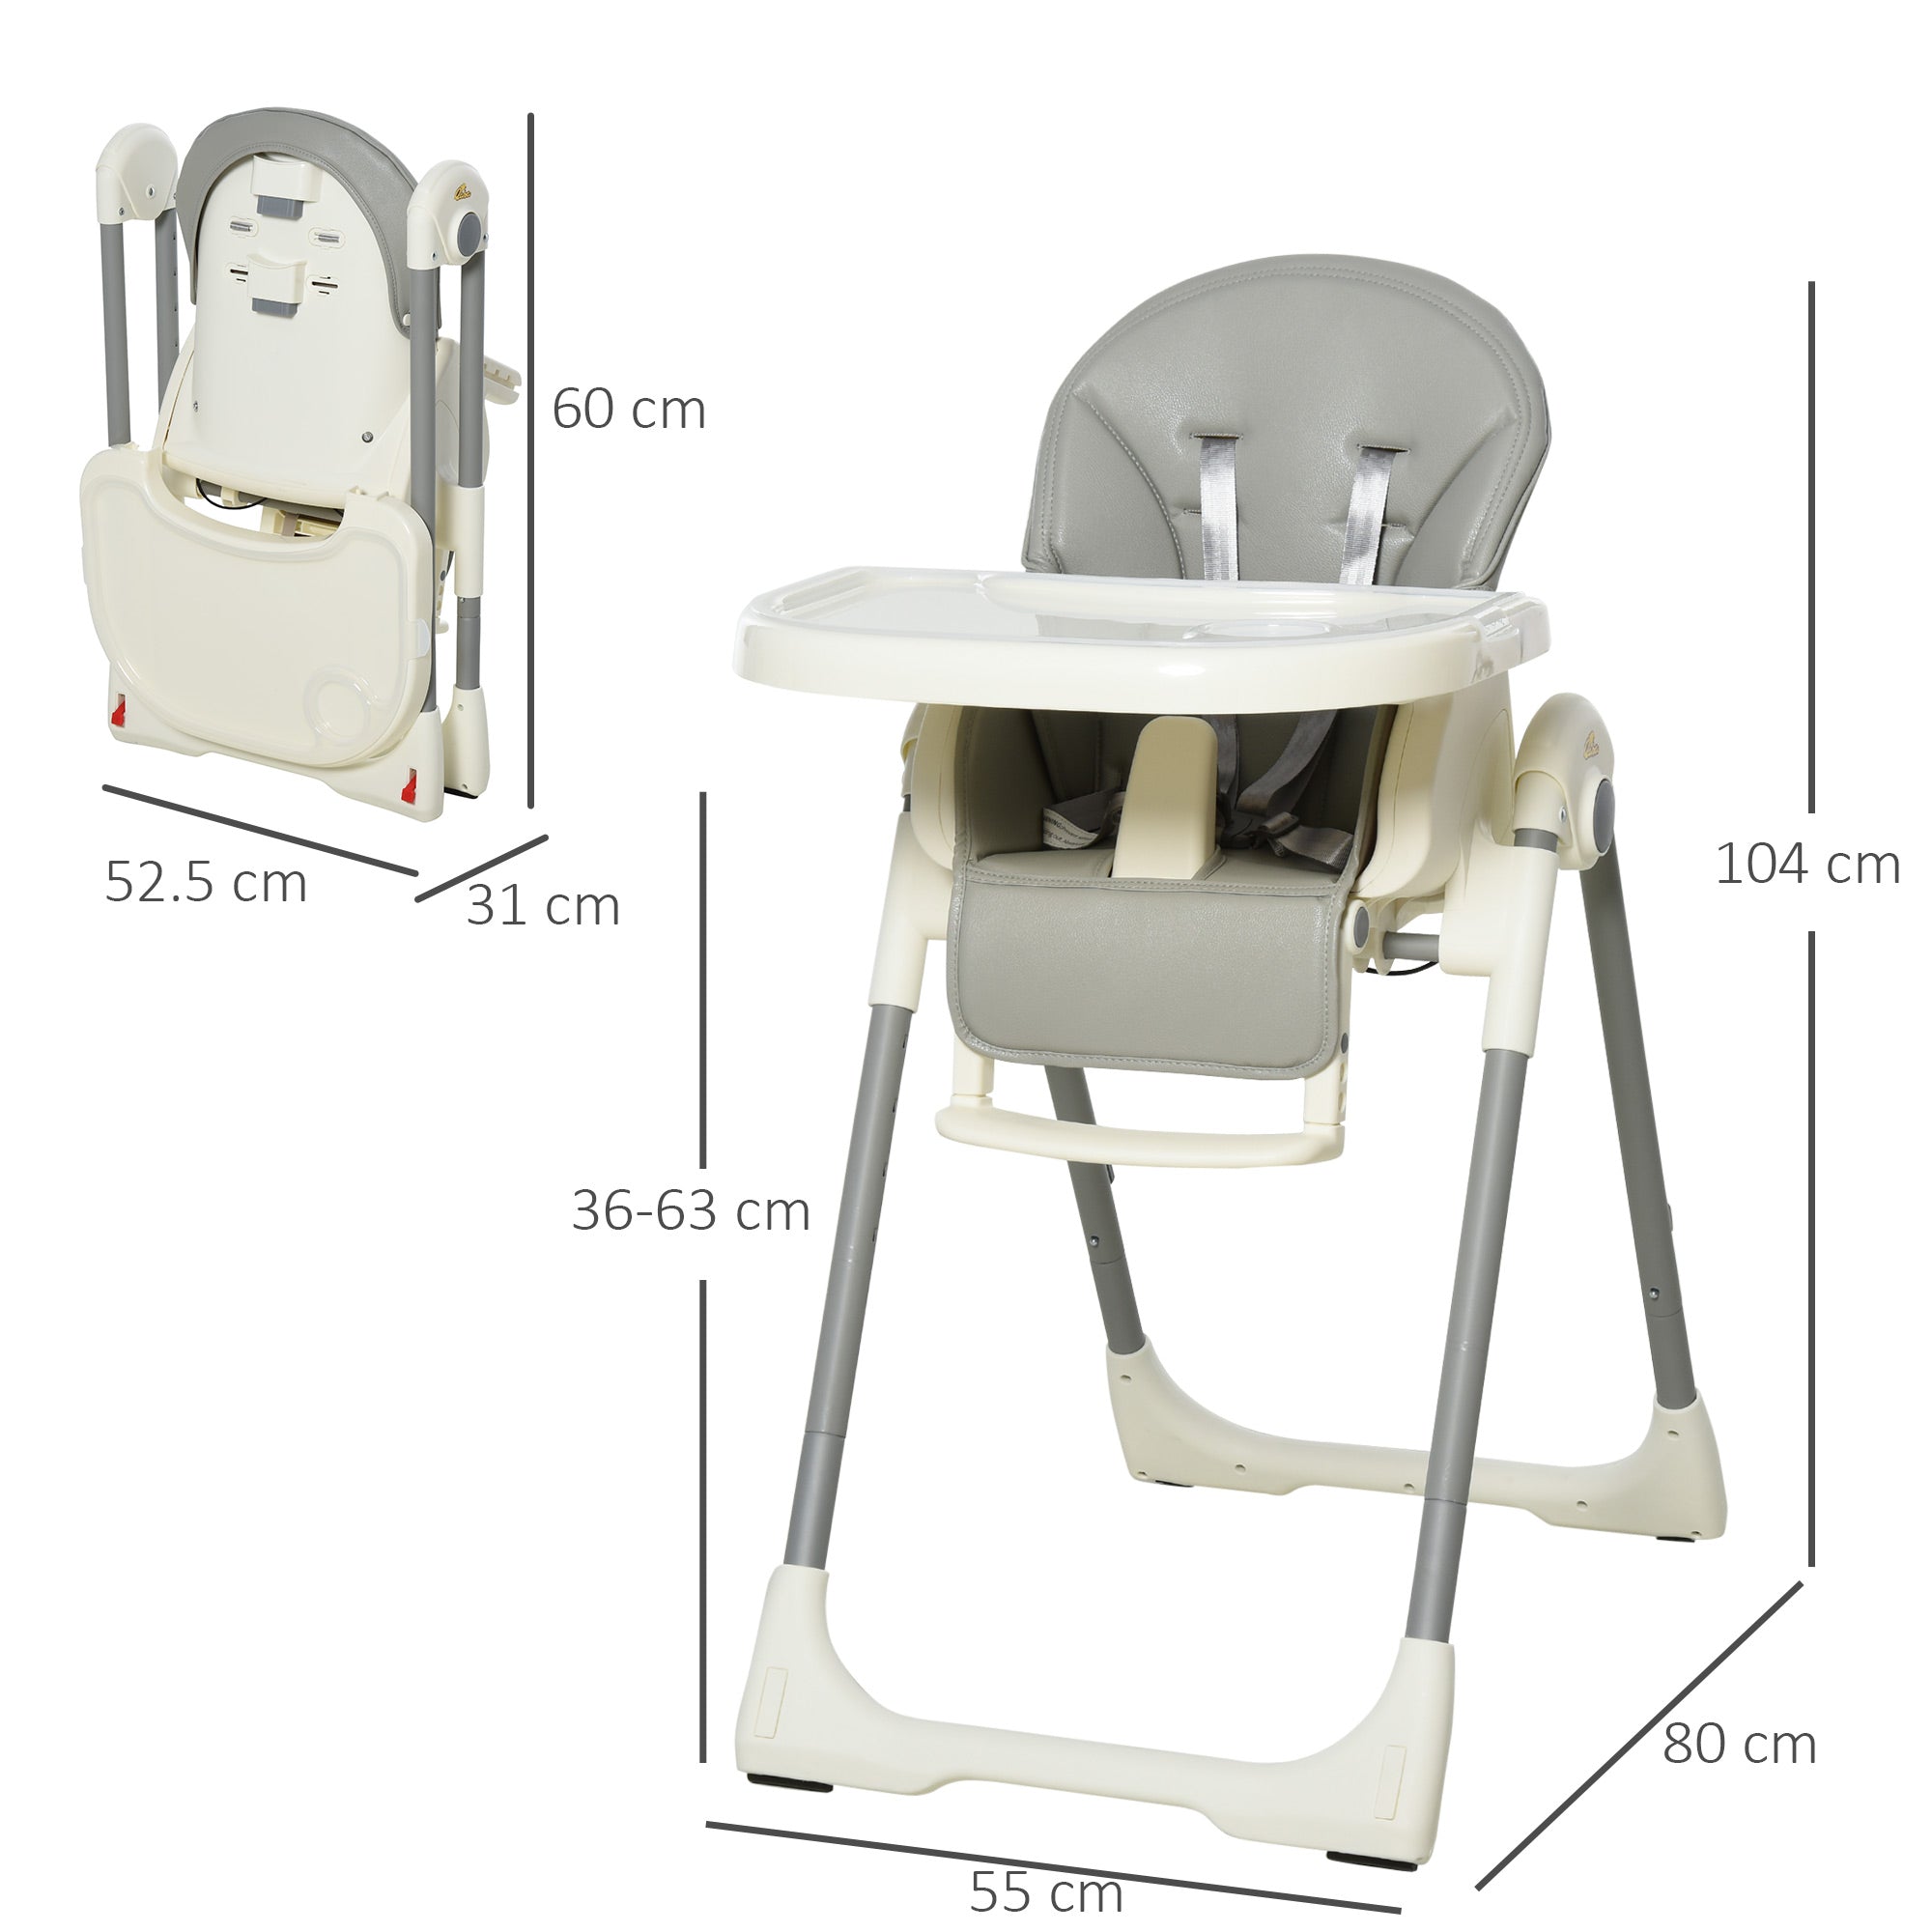 Foldable Baby High Chair Convertible to Toddler Chair Height Adjustable with Removable Tray 5-Point Harness Mobile with Wheels Grey-2